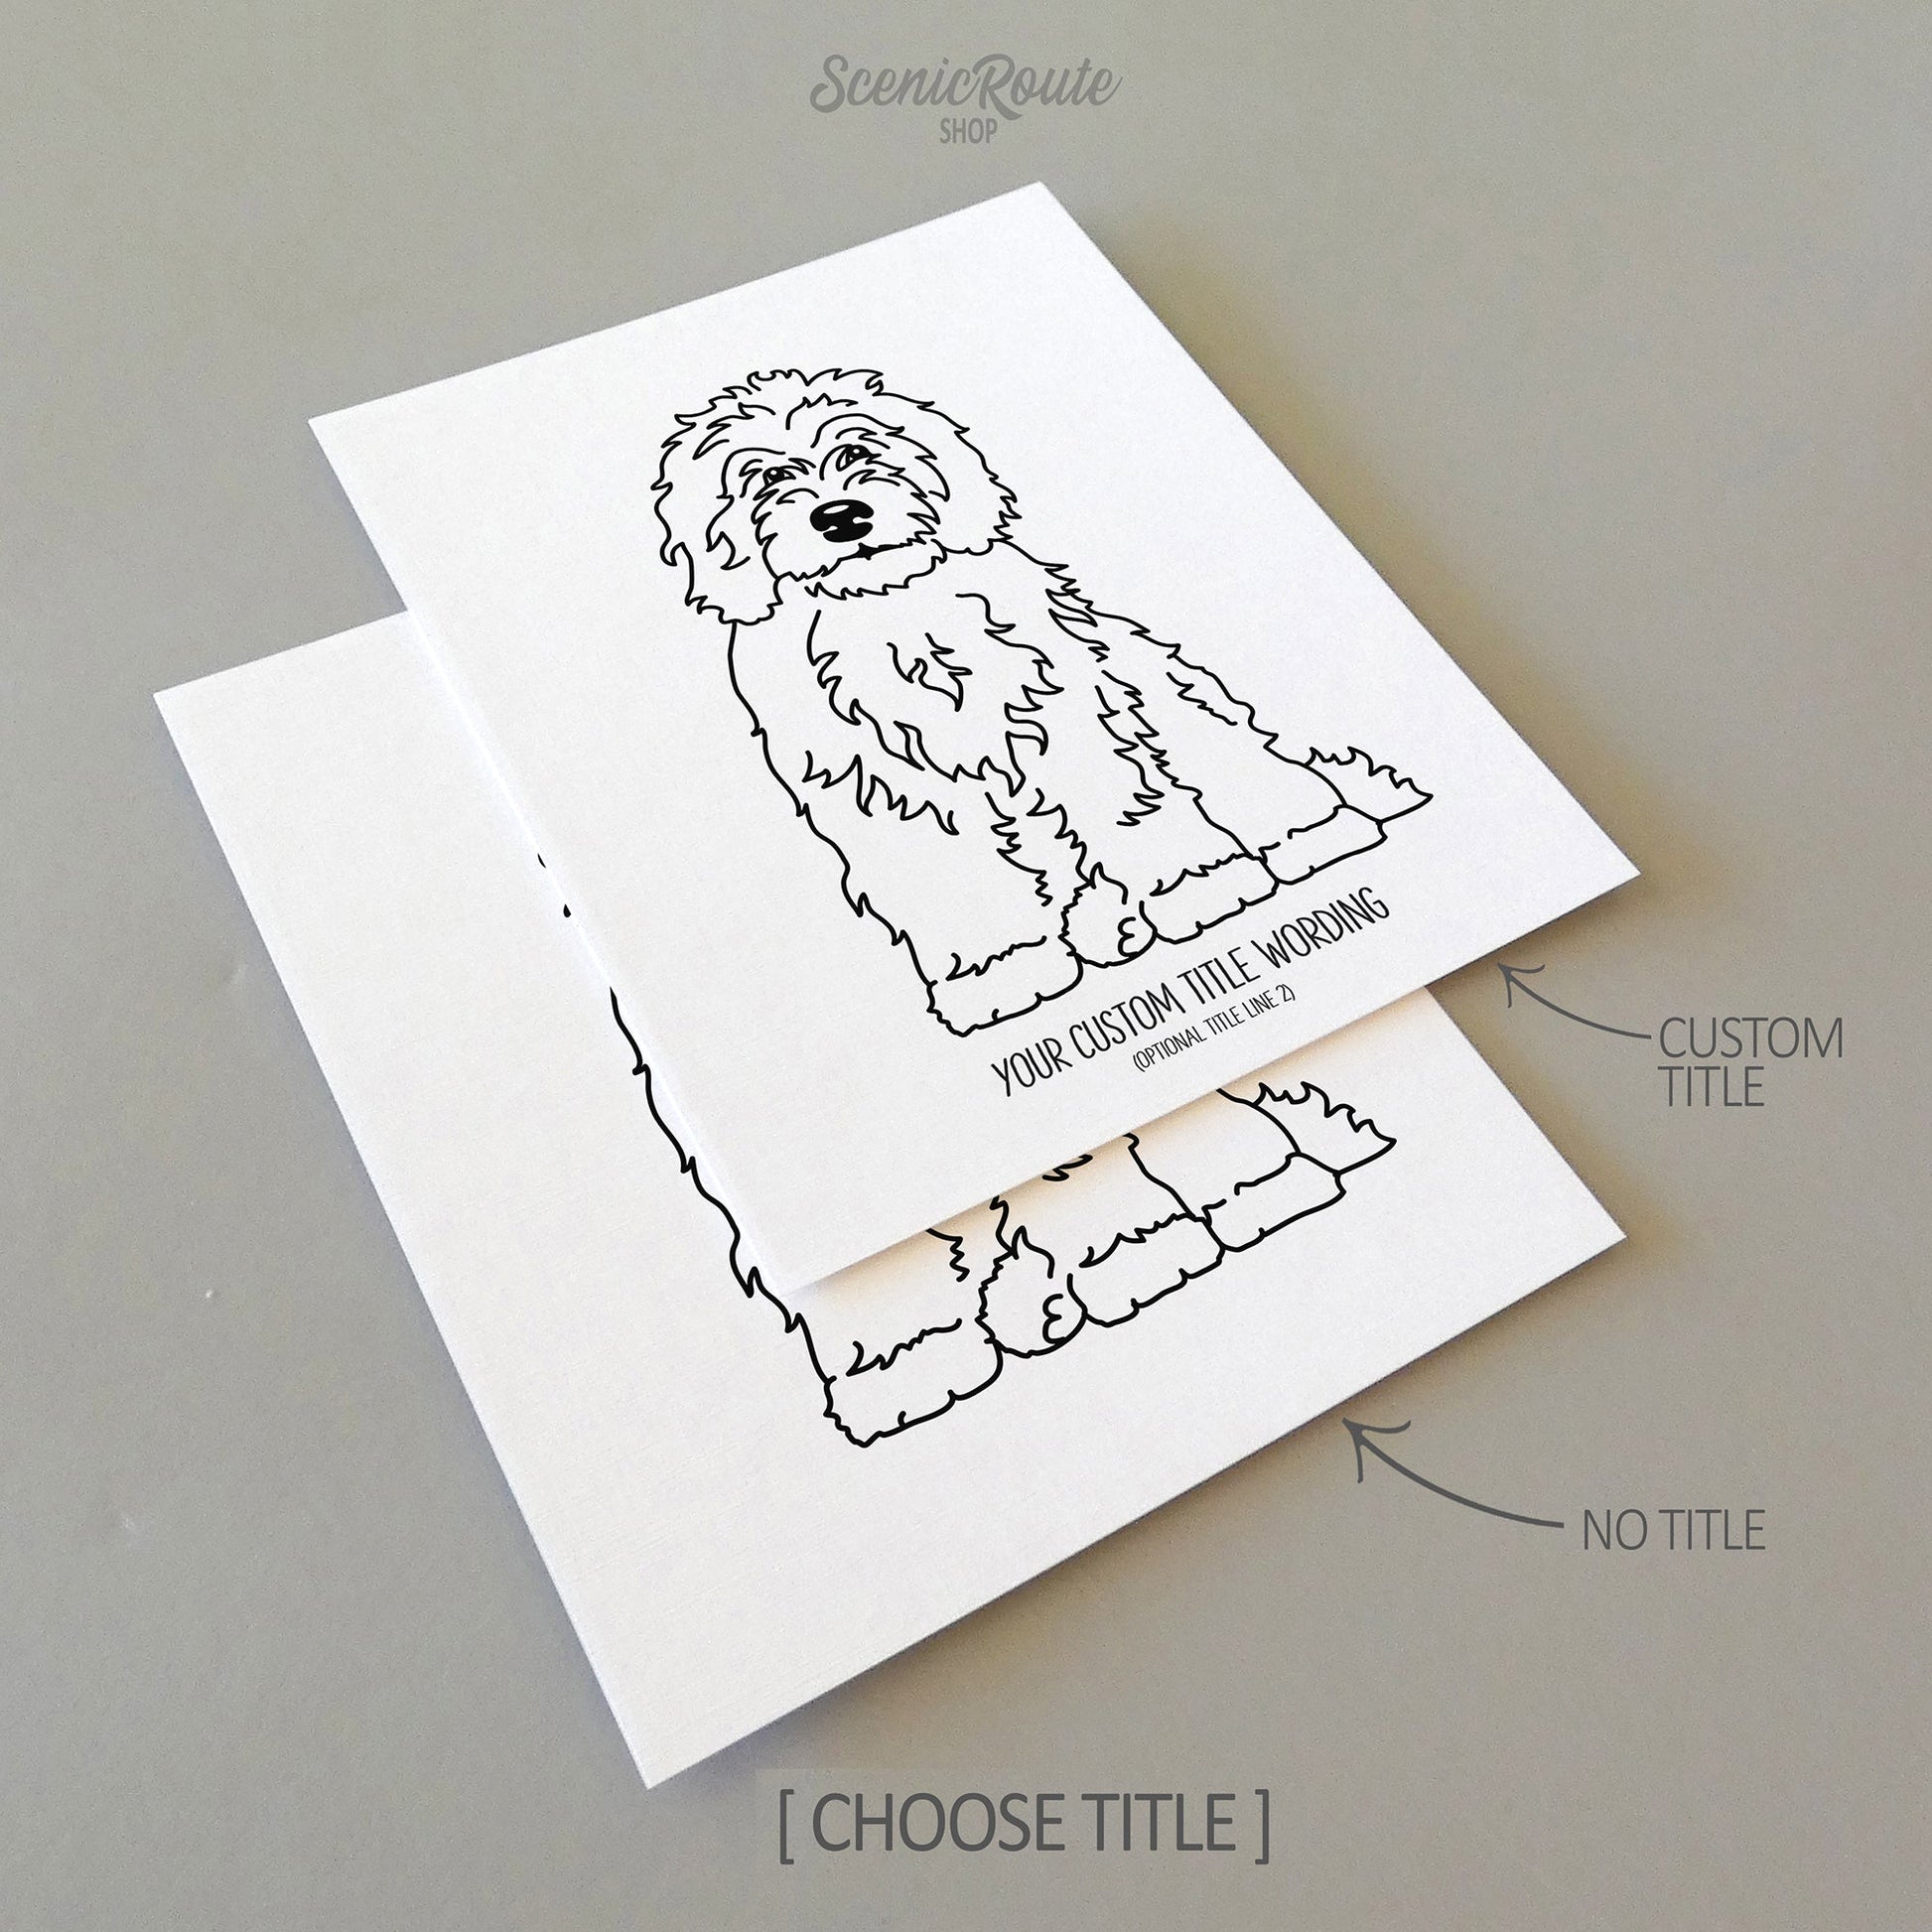 Two line art drawings of a Sheepadoodle dog on white linen paper with a gray background.  The pieces are shown with “No Title” and “Custom Title” options for the available art print options.